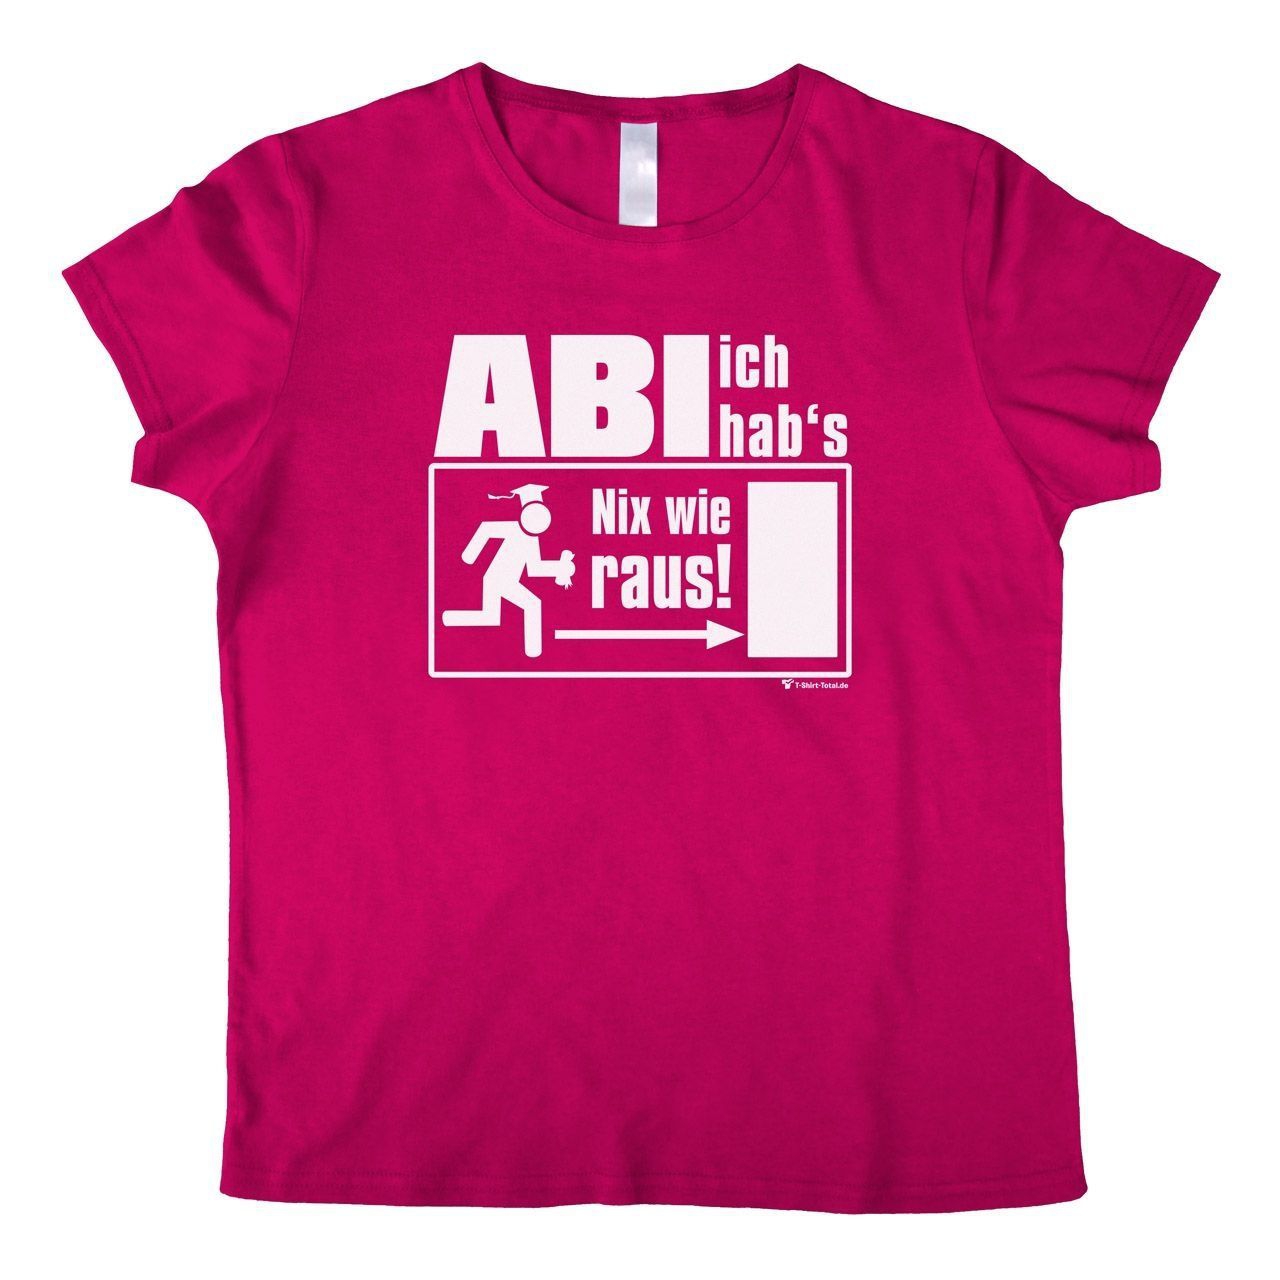 Abi ich habs Woman T-Shirt pink Small